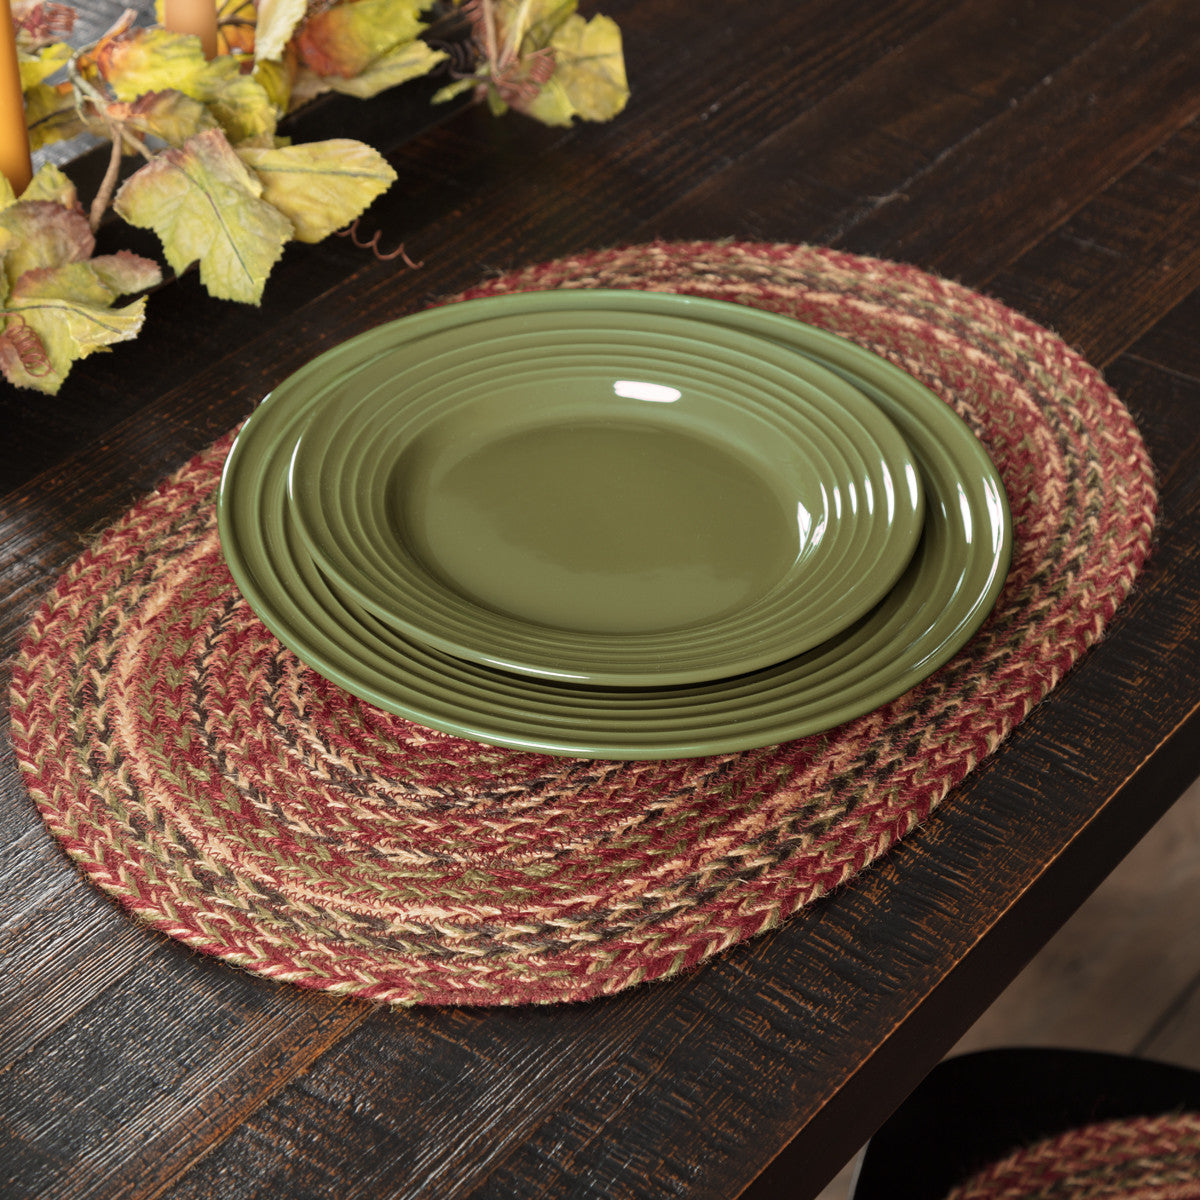 Shop by Kitchen Collection for braided or quilted runners and placemat